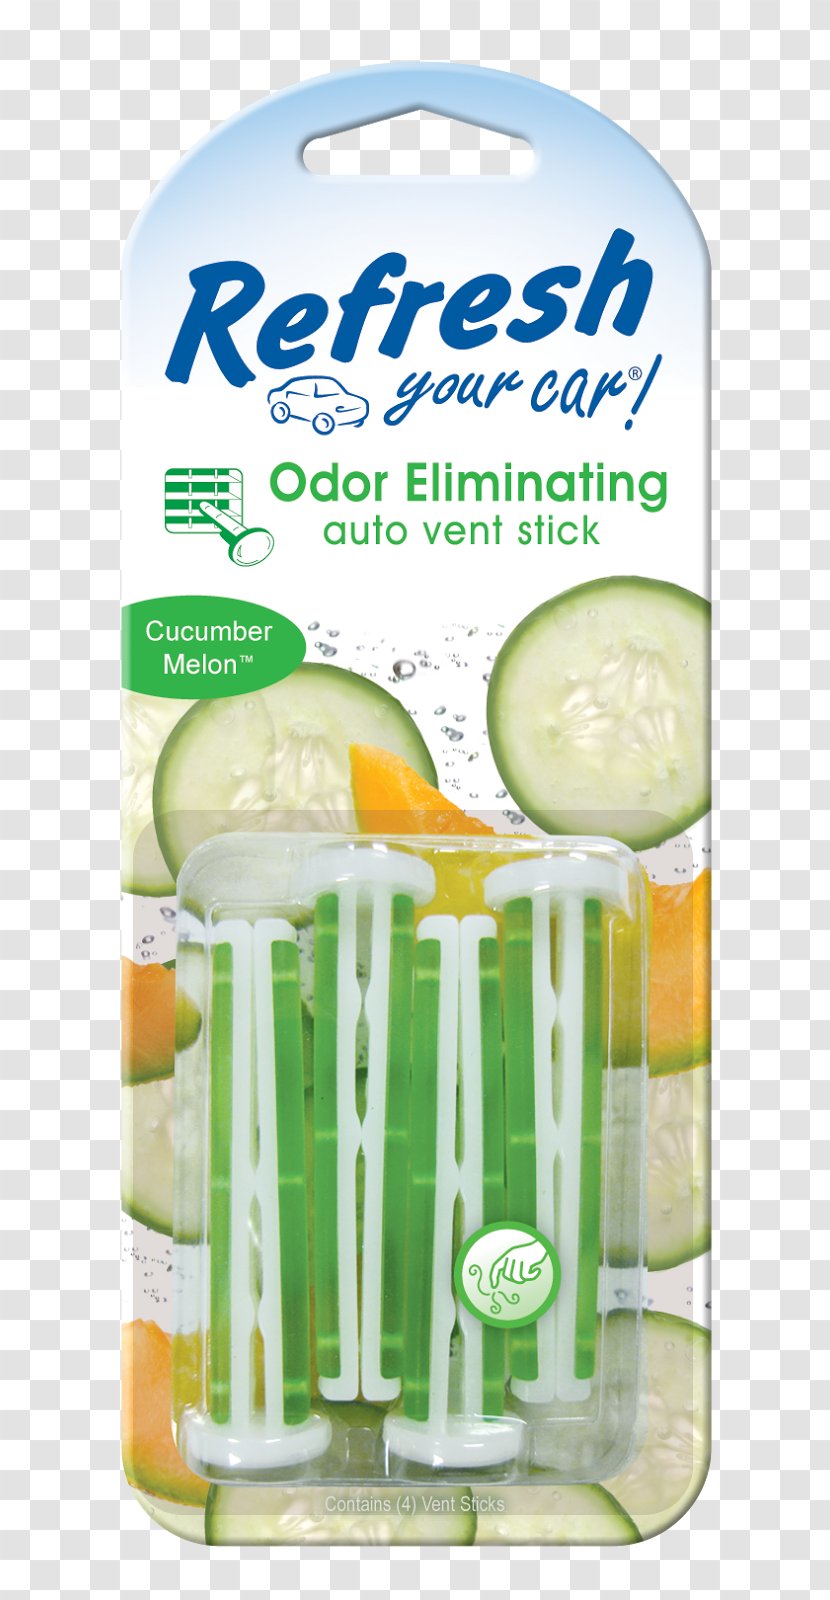 Car Little Trees Air Fresheners 09588 09578 - Juice Transparent PNG